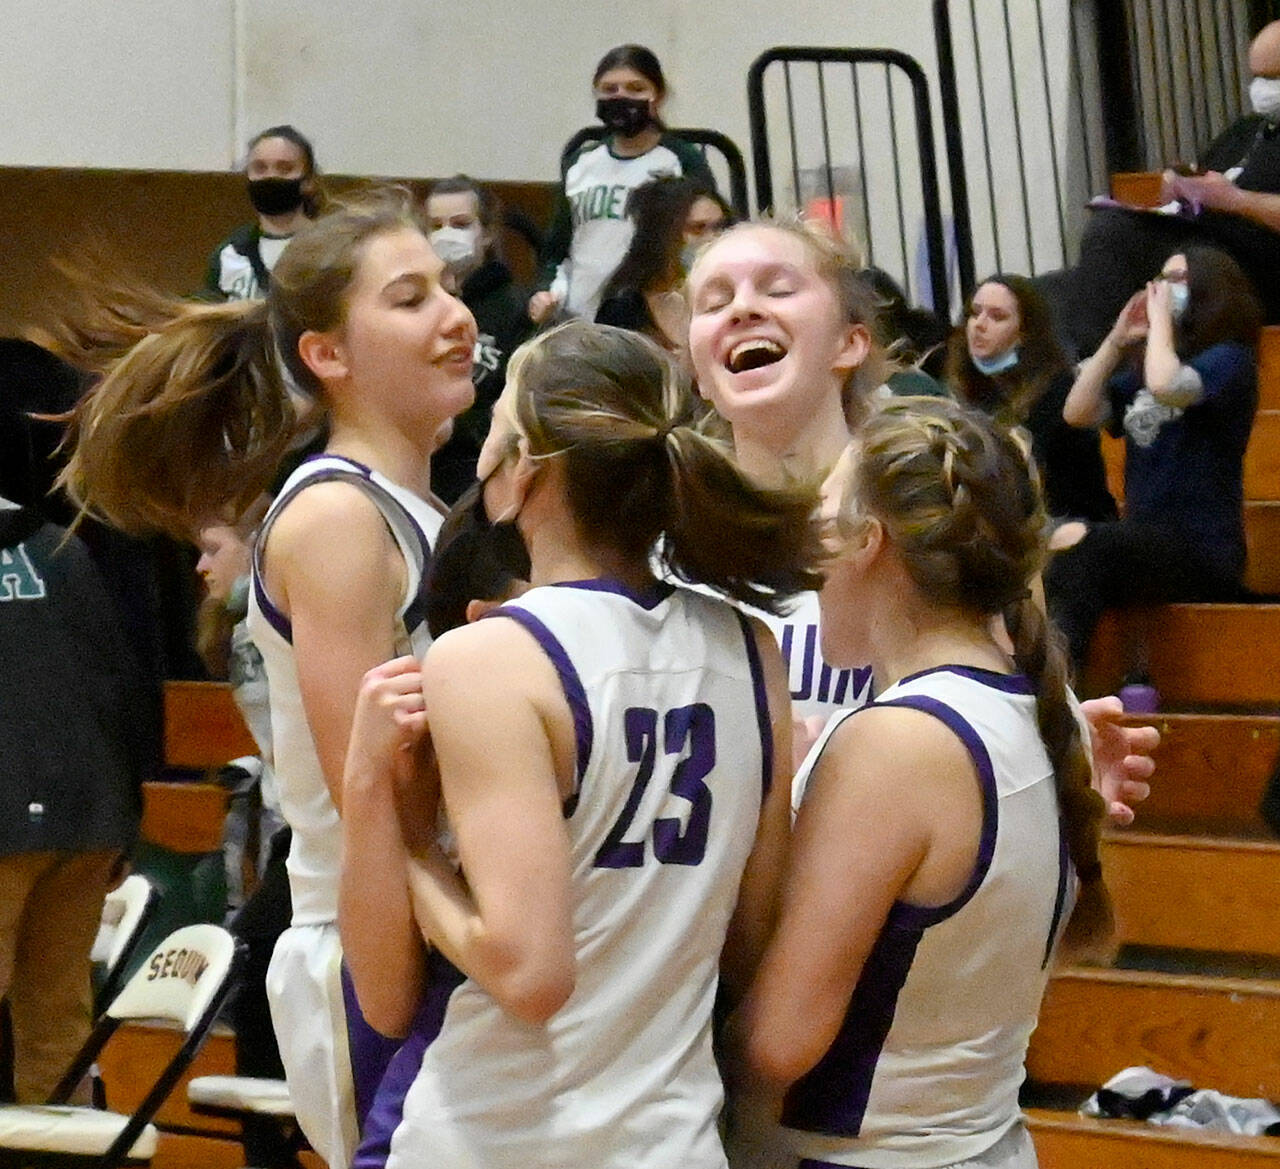 Sequim players celebrate a 60-55 win at home over rival Port Angeles, their first win over the Roughriders in six seasons — ending a 14-game Rider win streak. Sequim Gazette photo by Michael Dashiell